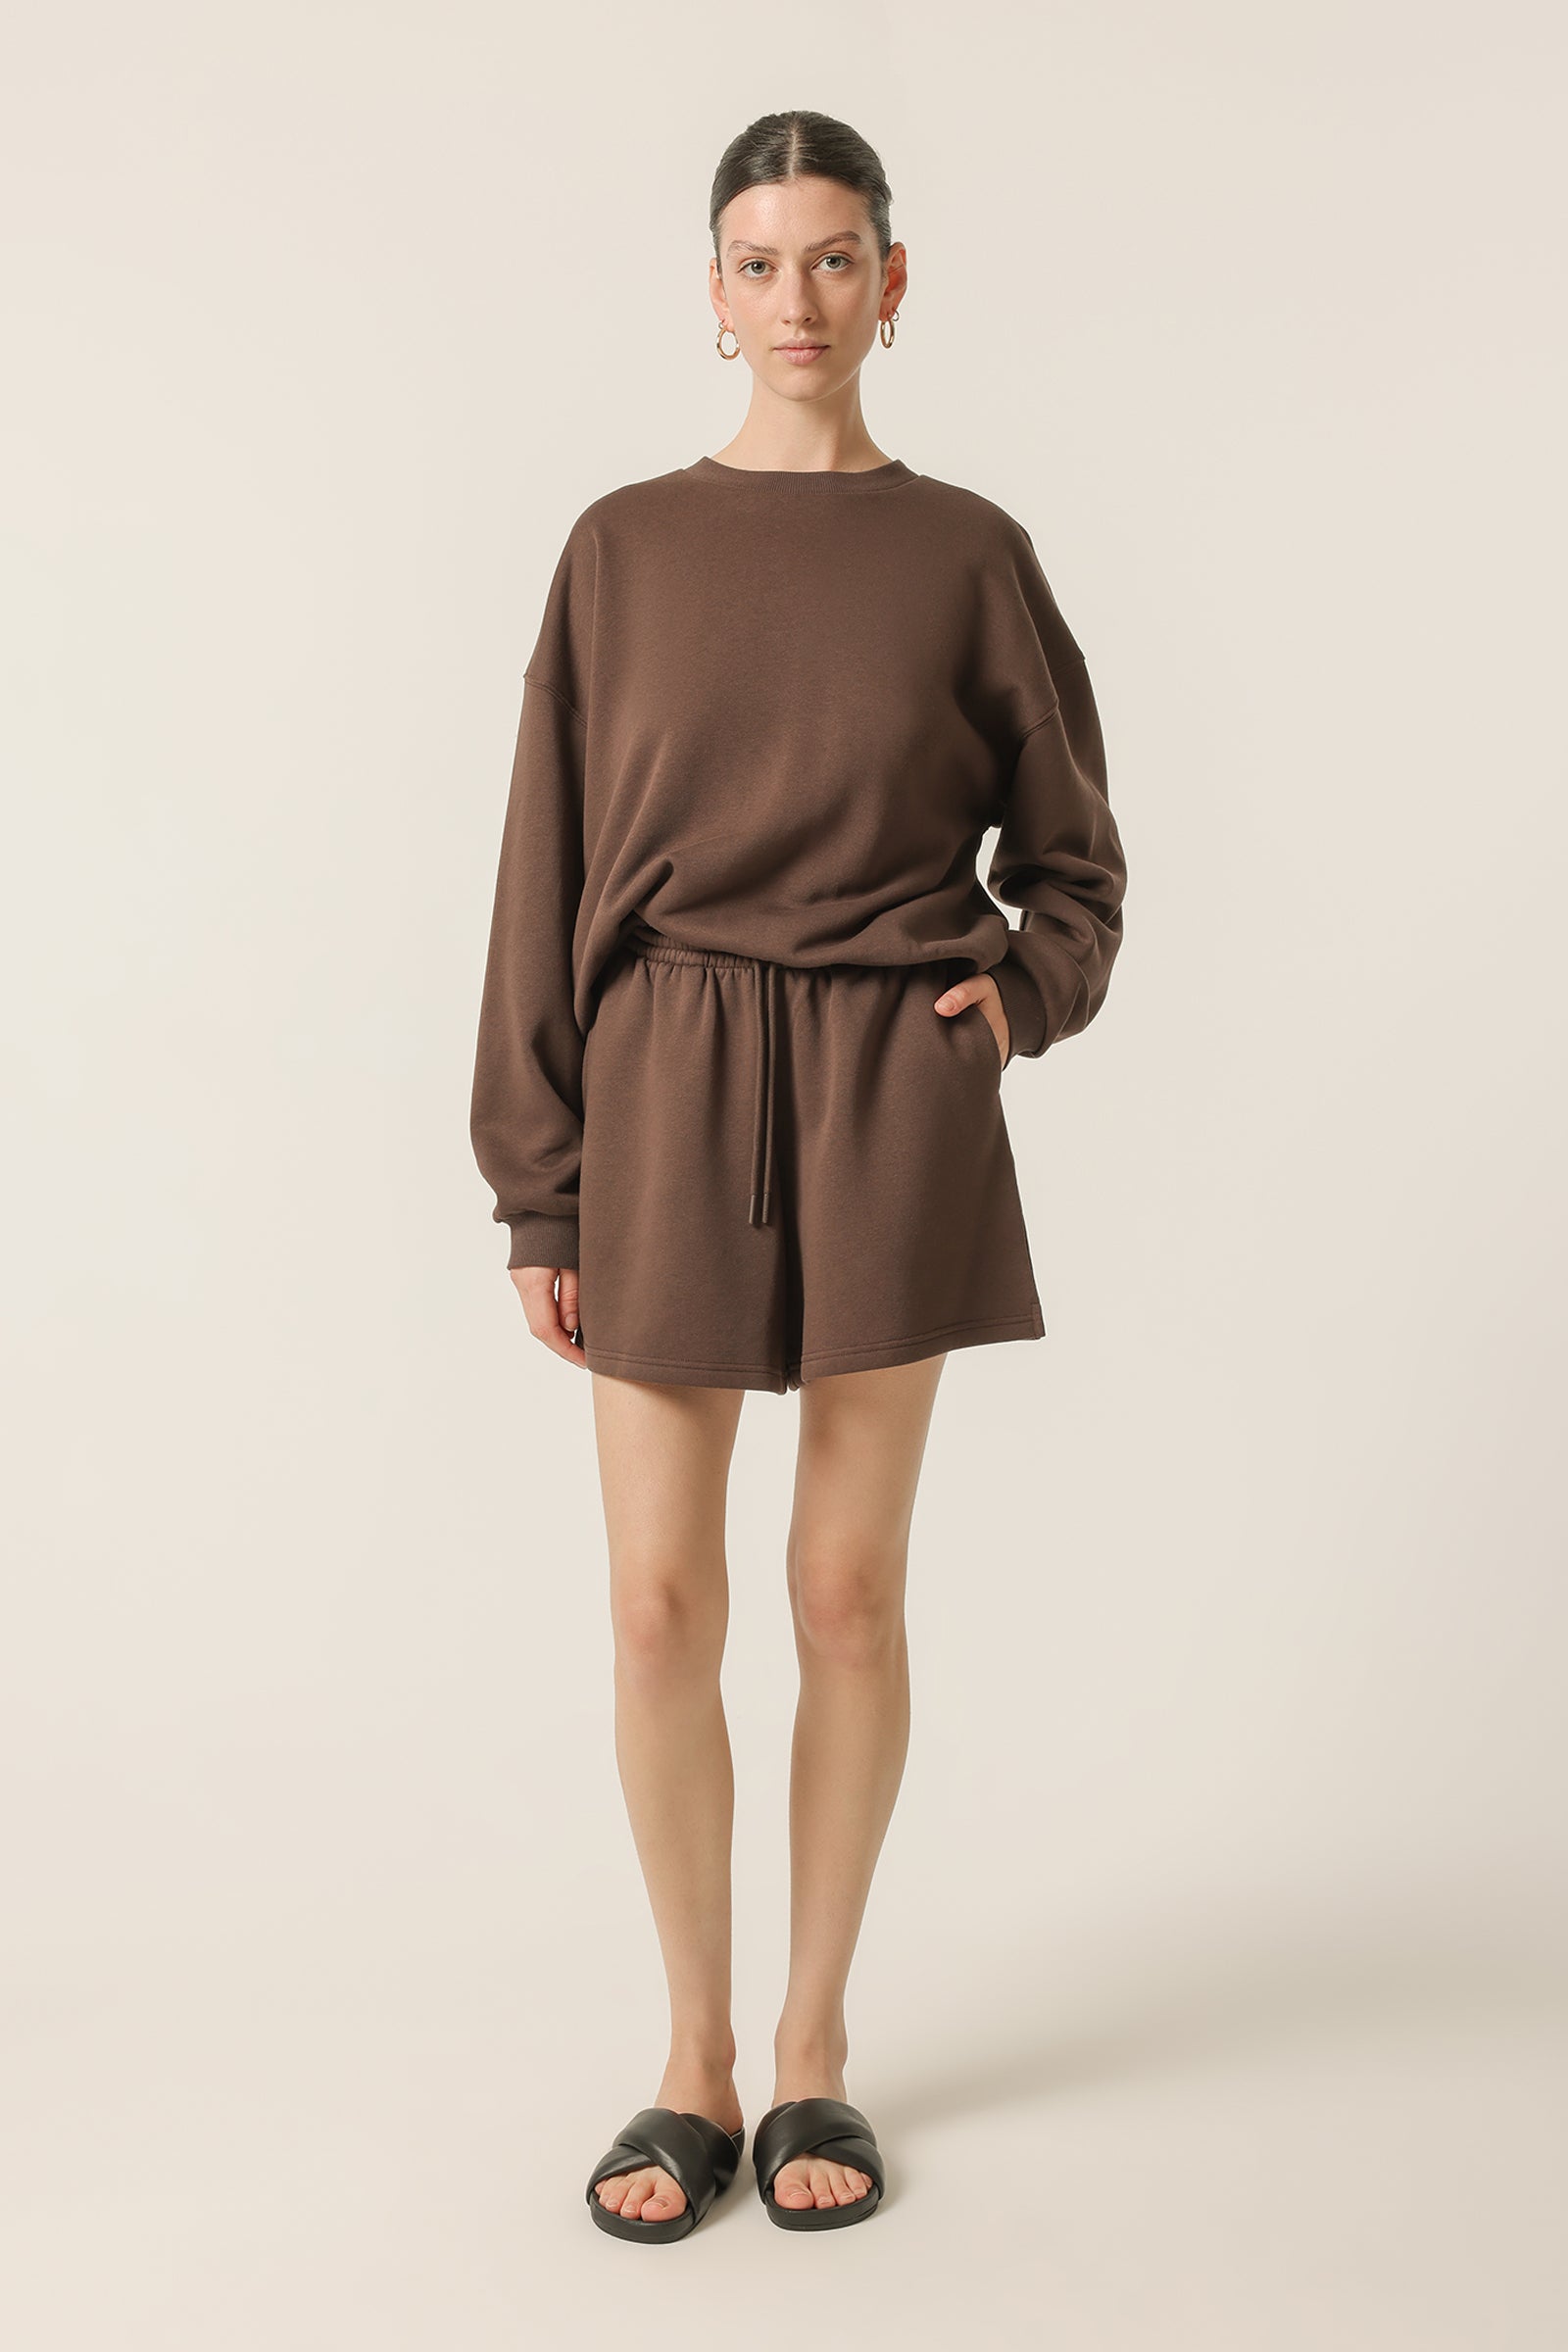 Nude Lucy Carter Curated Short In a Deep Brown Bark Colour 